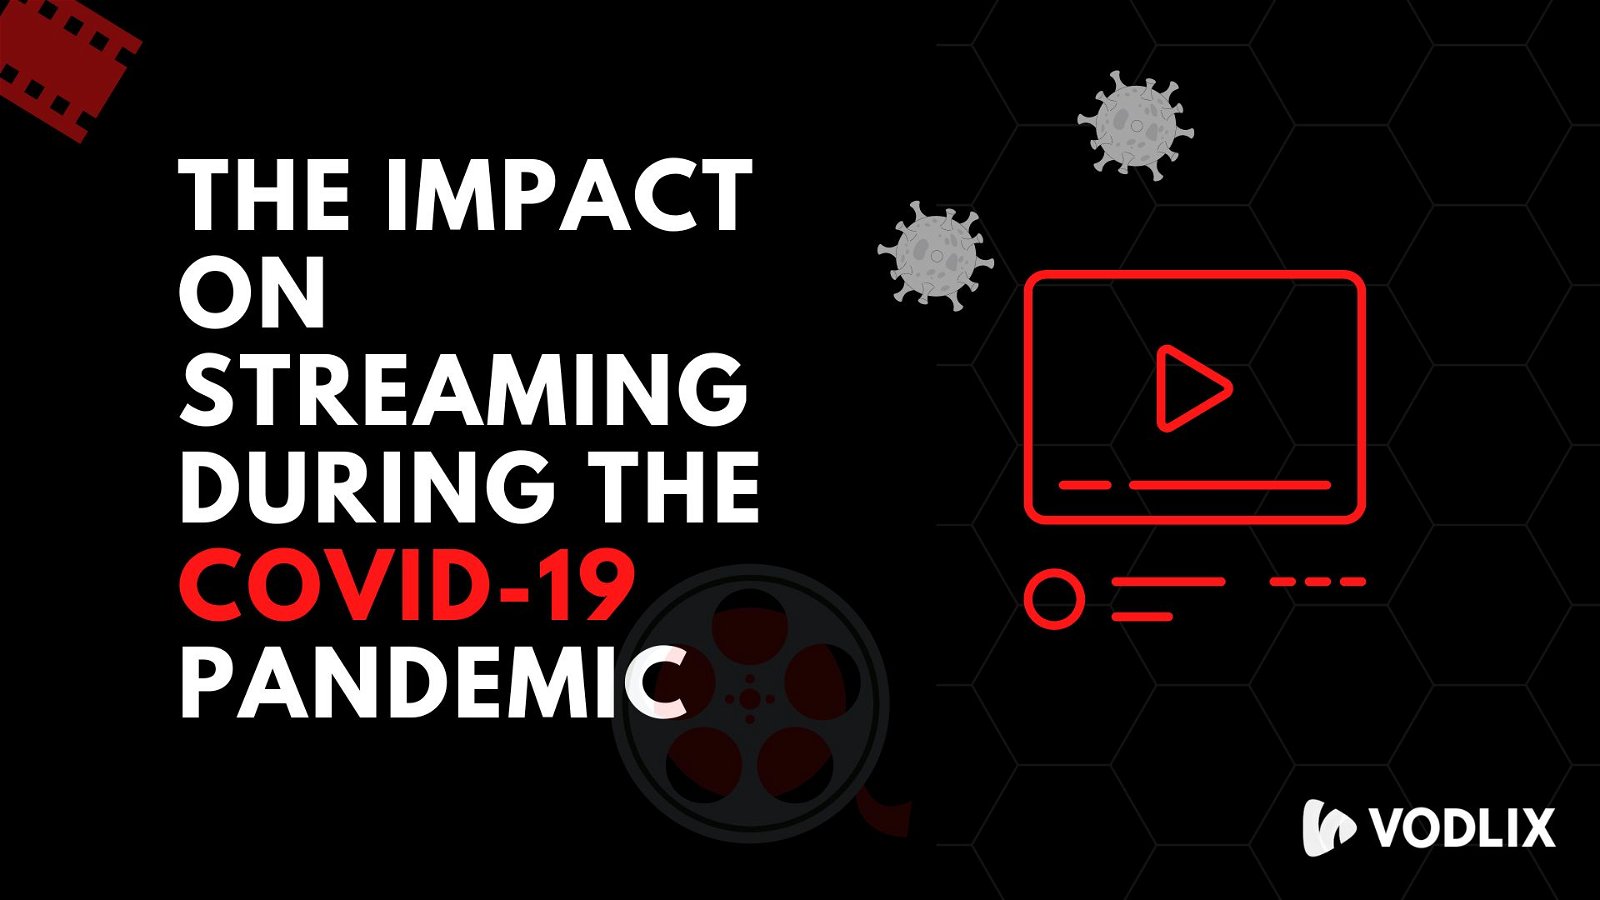 The Impact on Streaming During the COVID-19 Pandemic